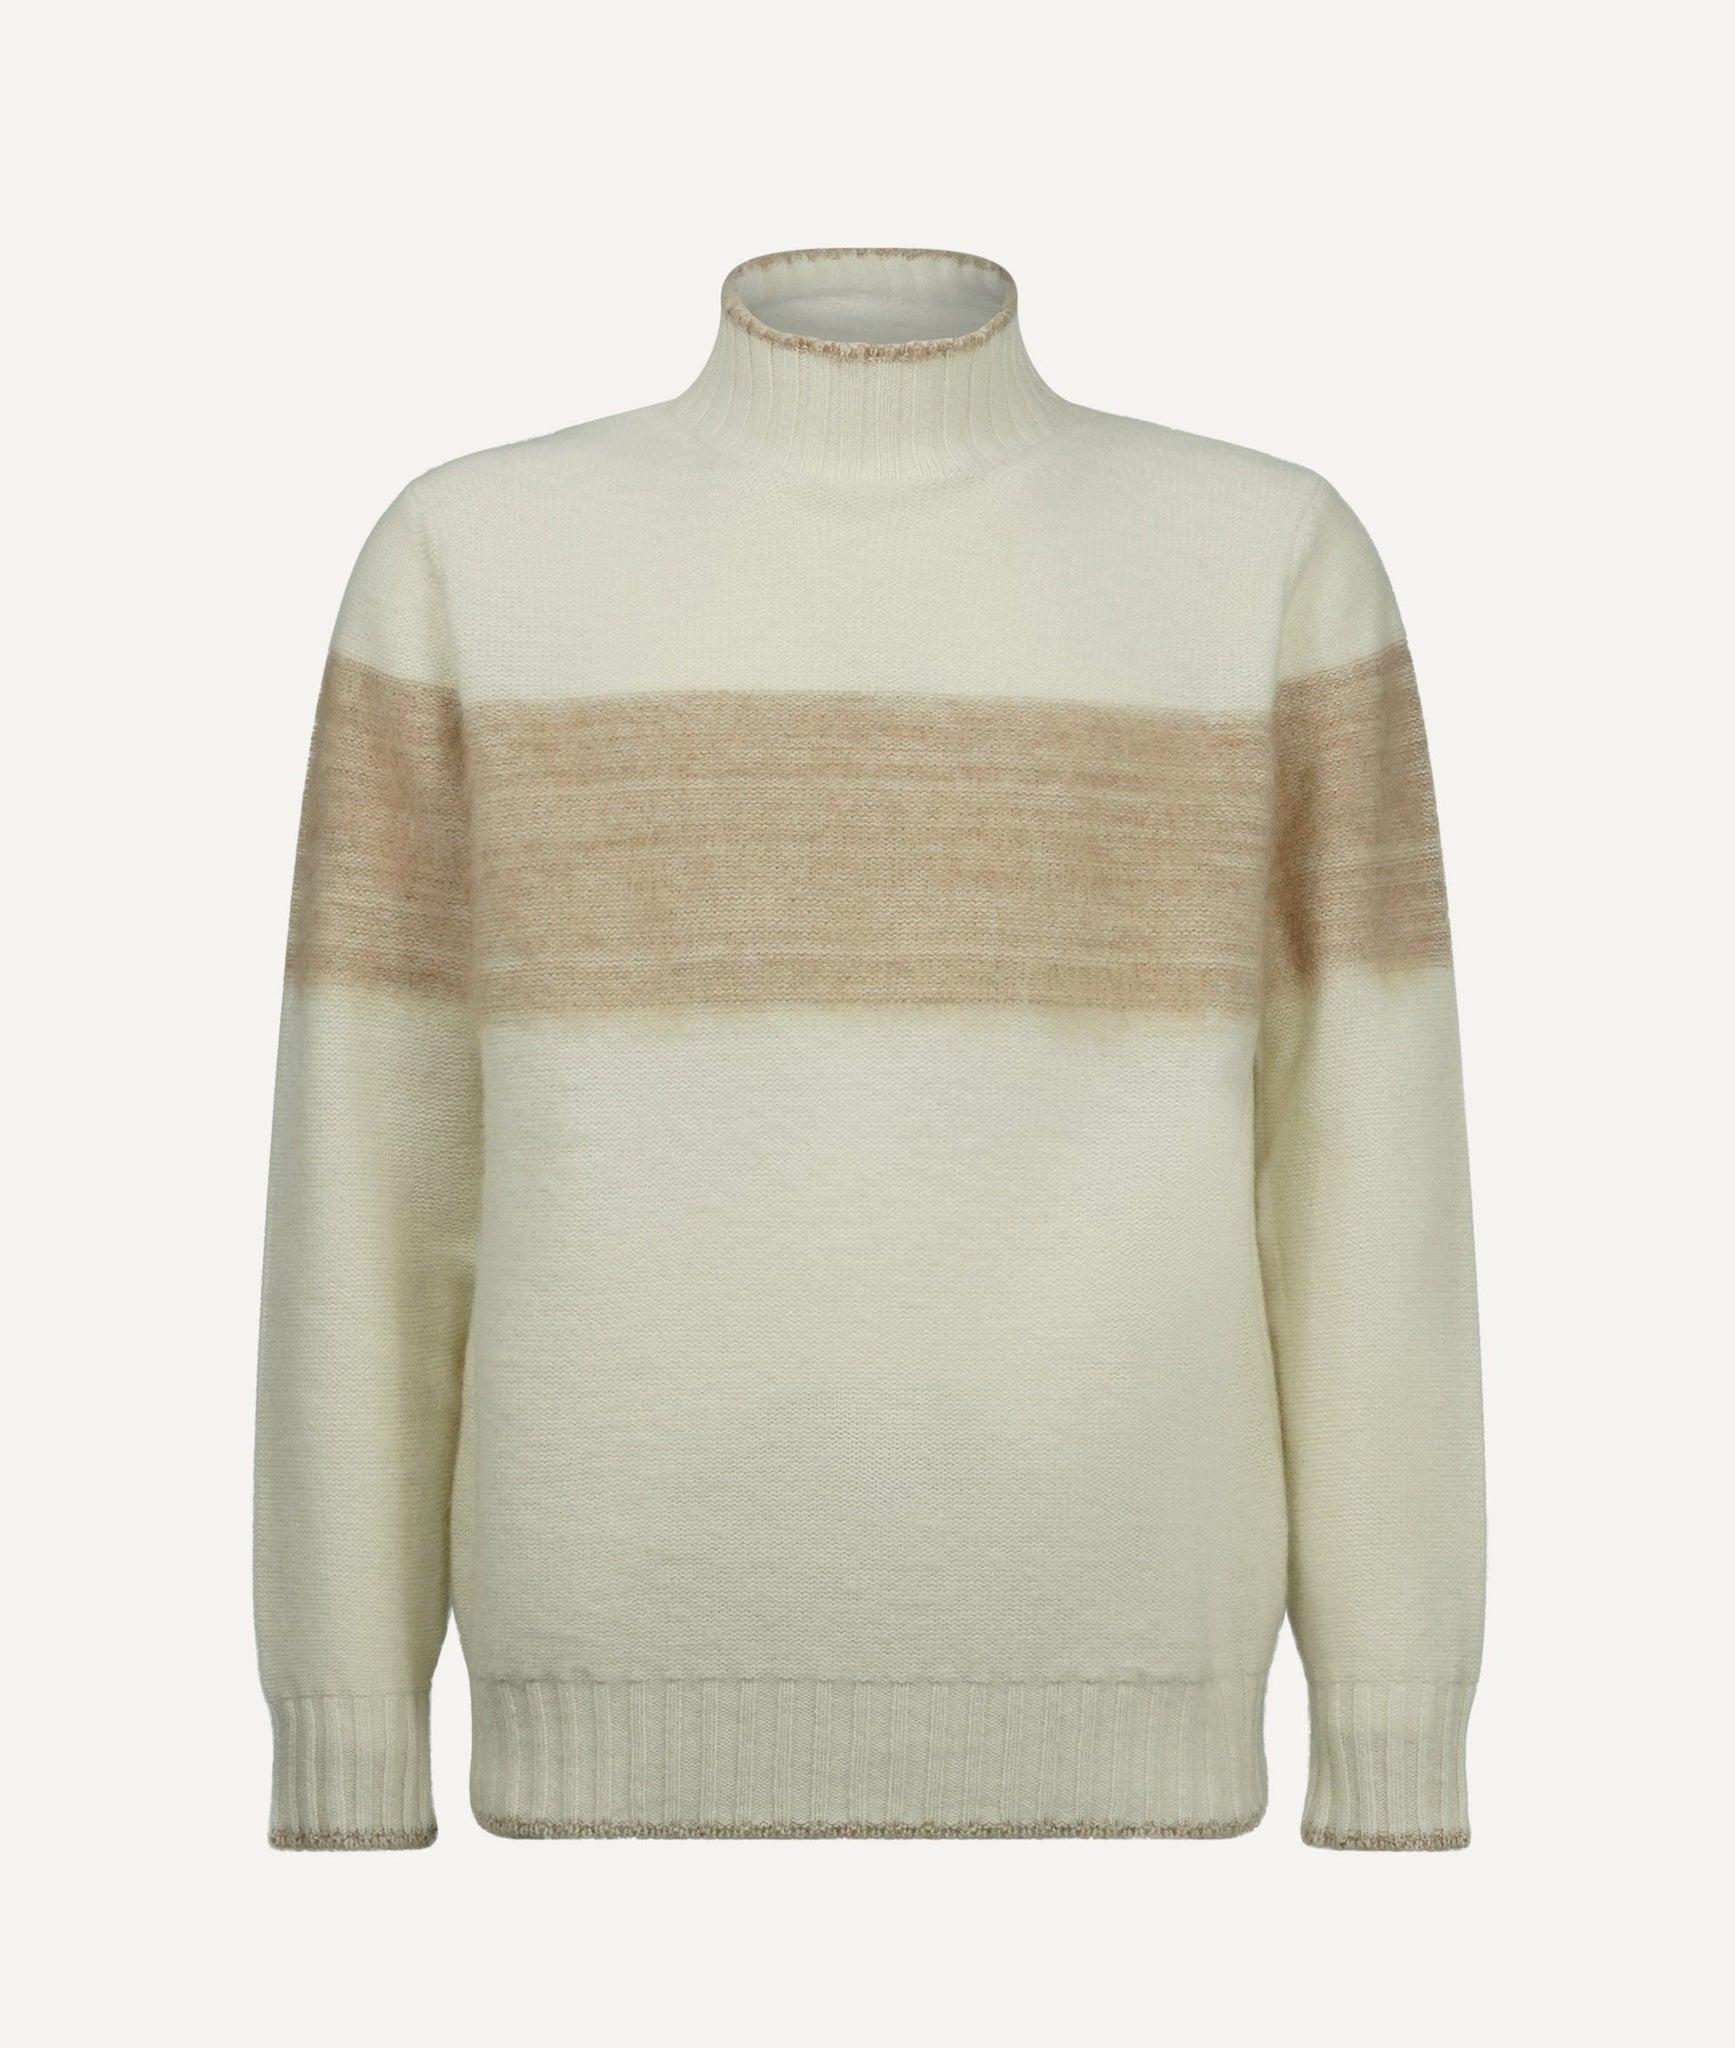 Eleventy - Sweater in Wool, Mohair & Cashmere